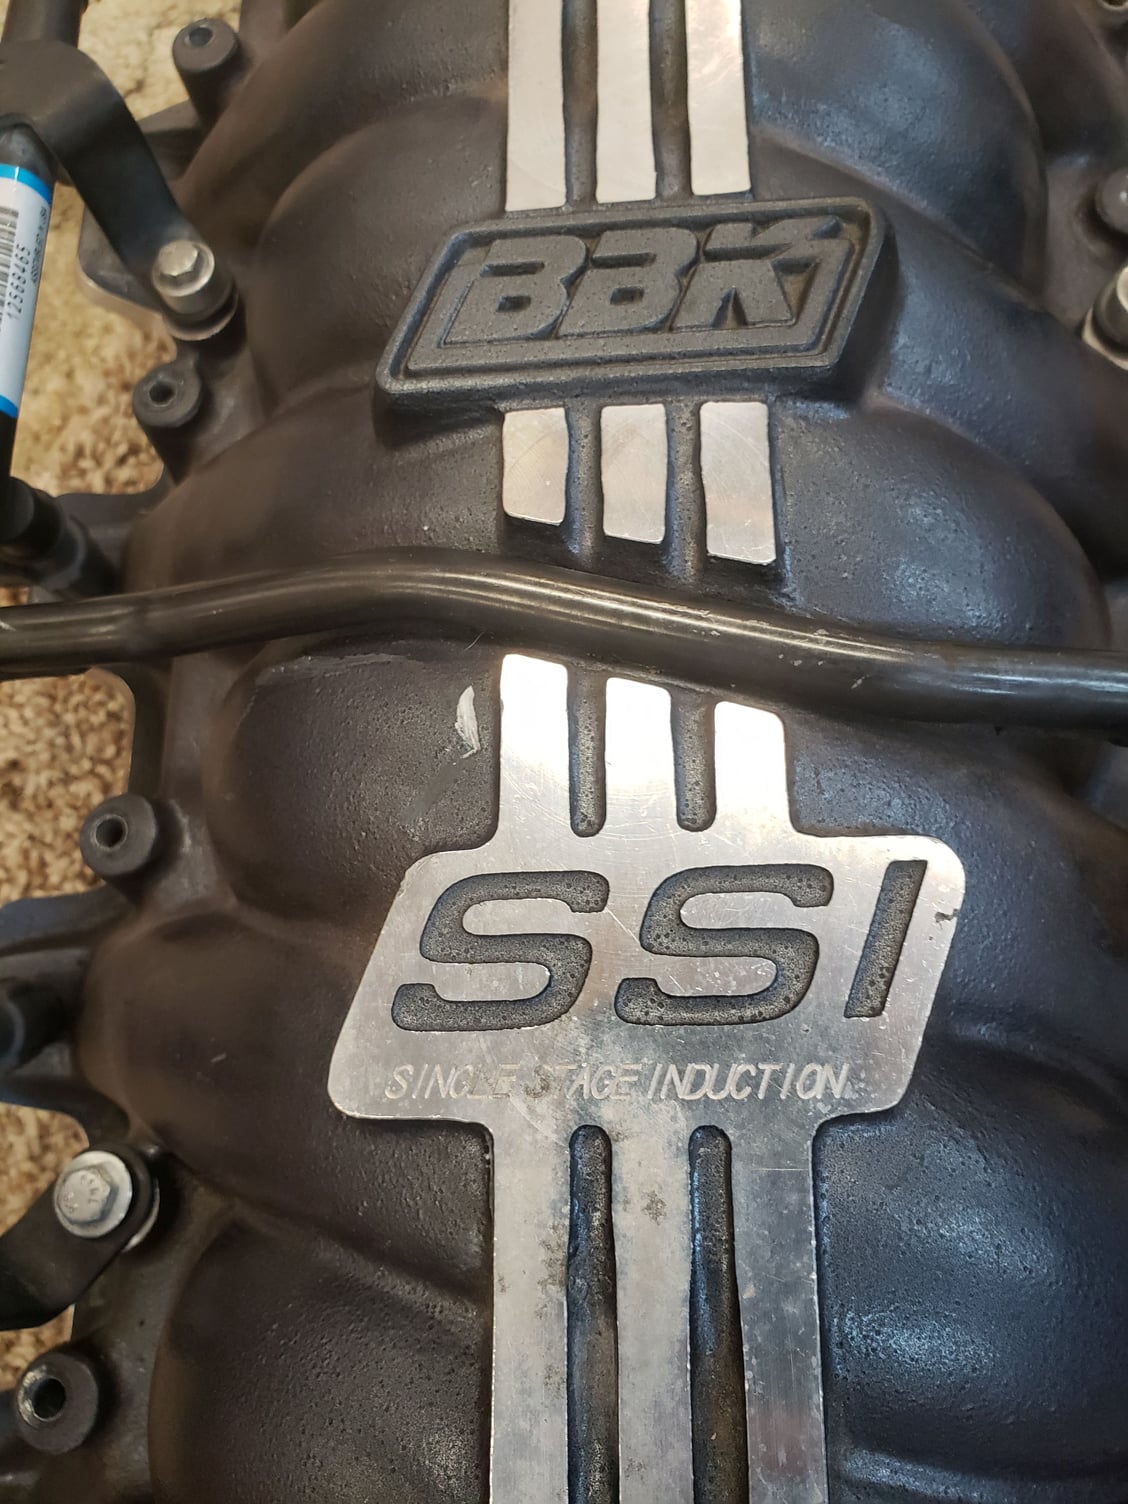  - Bbk SSI intake and bbk 85mm throttle body - Russellville, KY 42276, United States